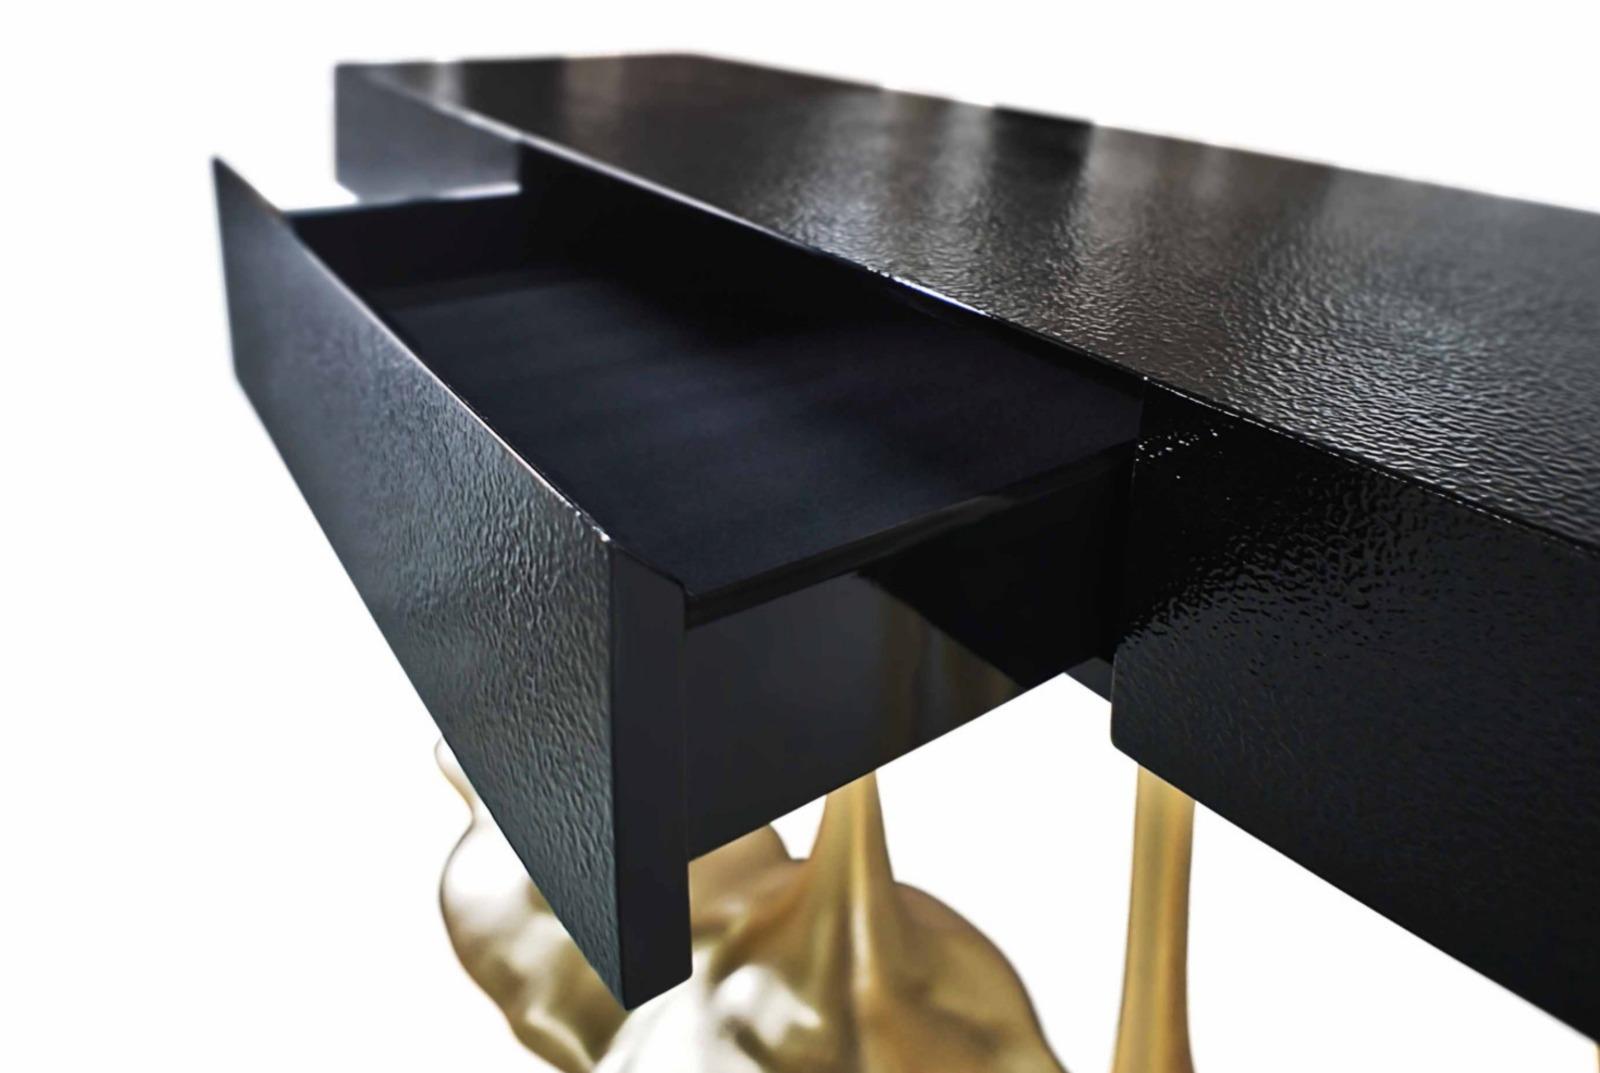 Portuguese New Design Console in Wood finished in Black High Gloss For Sale